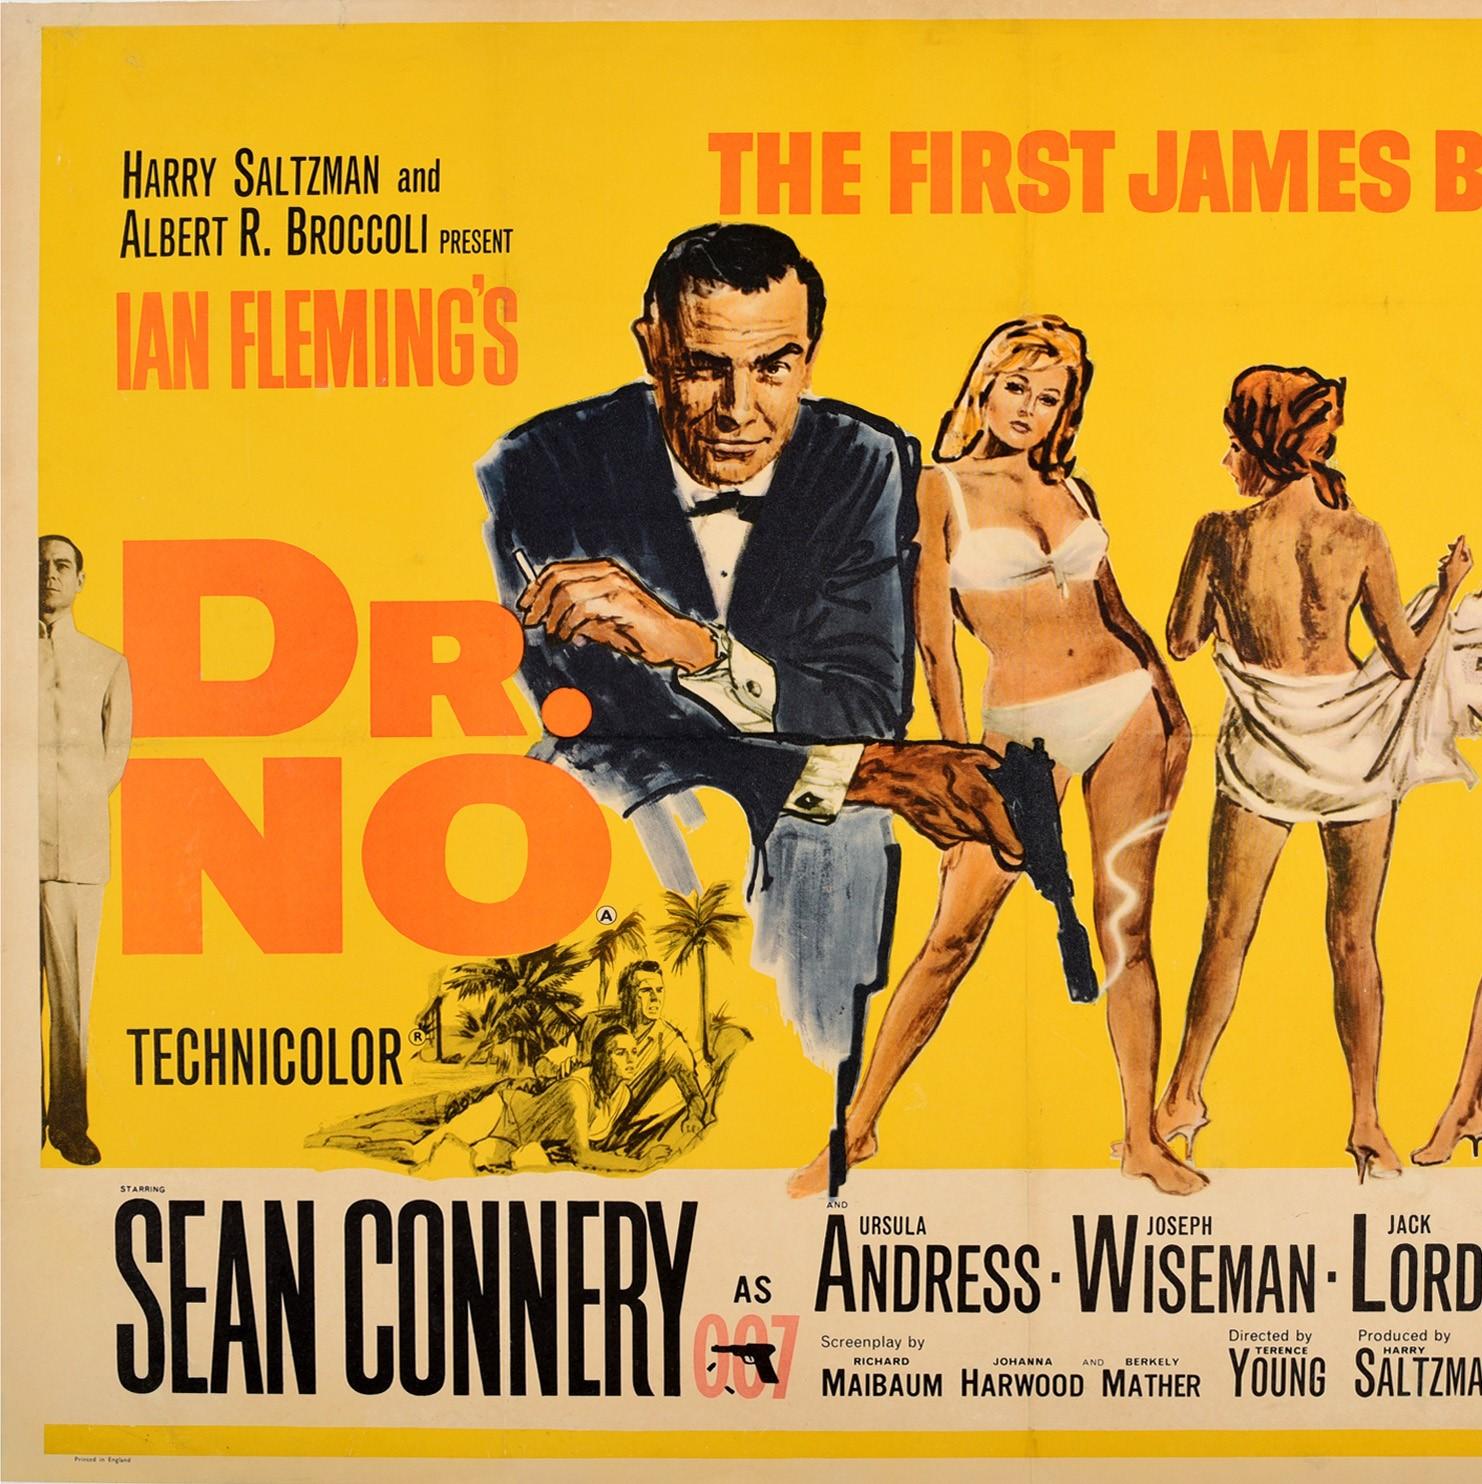 Original vintage movie poster for the original release of the classic British spy film James Bond Dr. No directed by Terence Young and starring Sean Connery in the lead role with Ursula Andress as Bond Girl Honey Ryder, Joseph Wiseman as Dr No, Jack